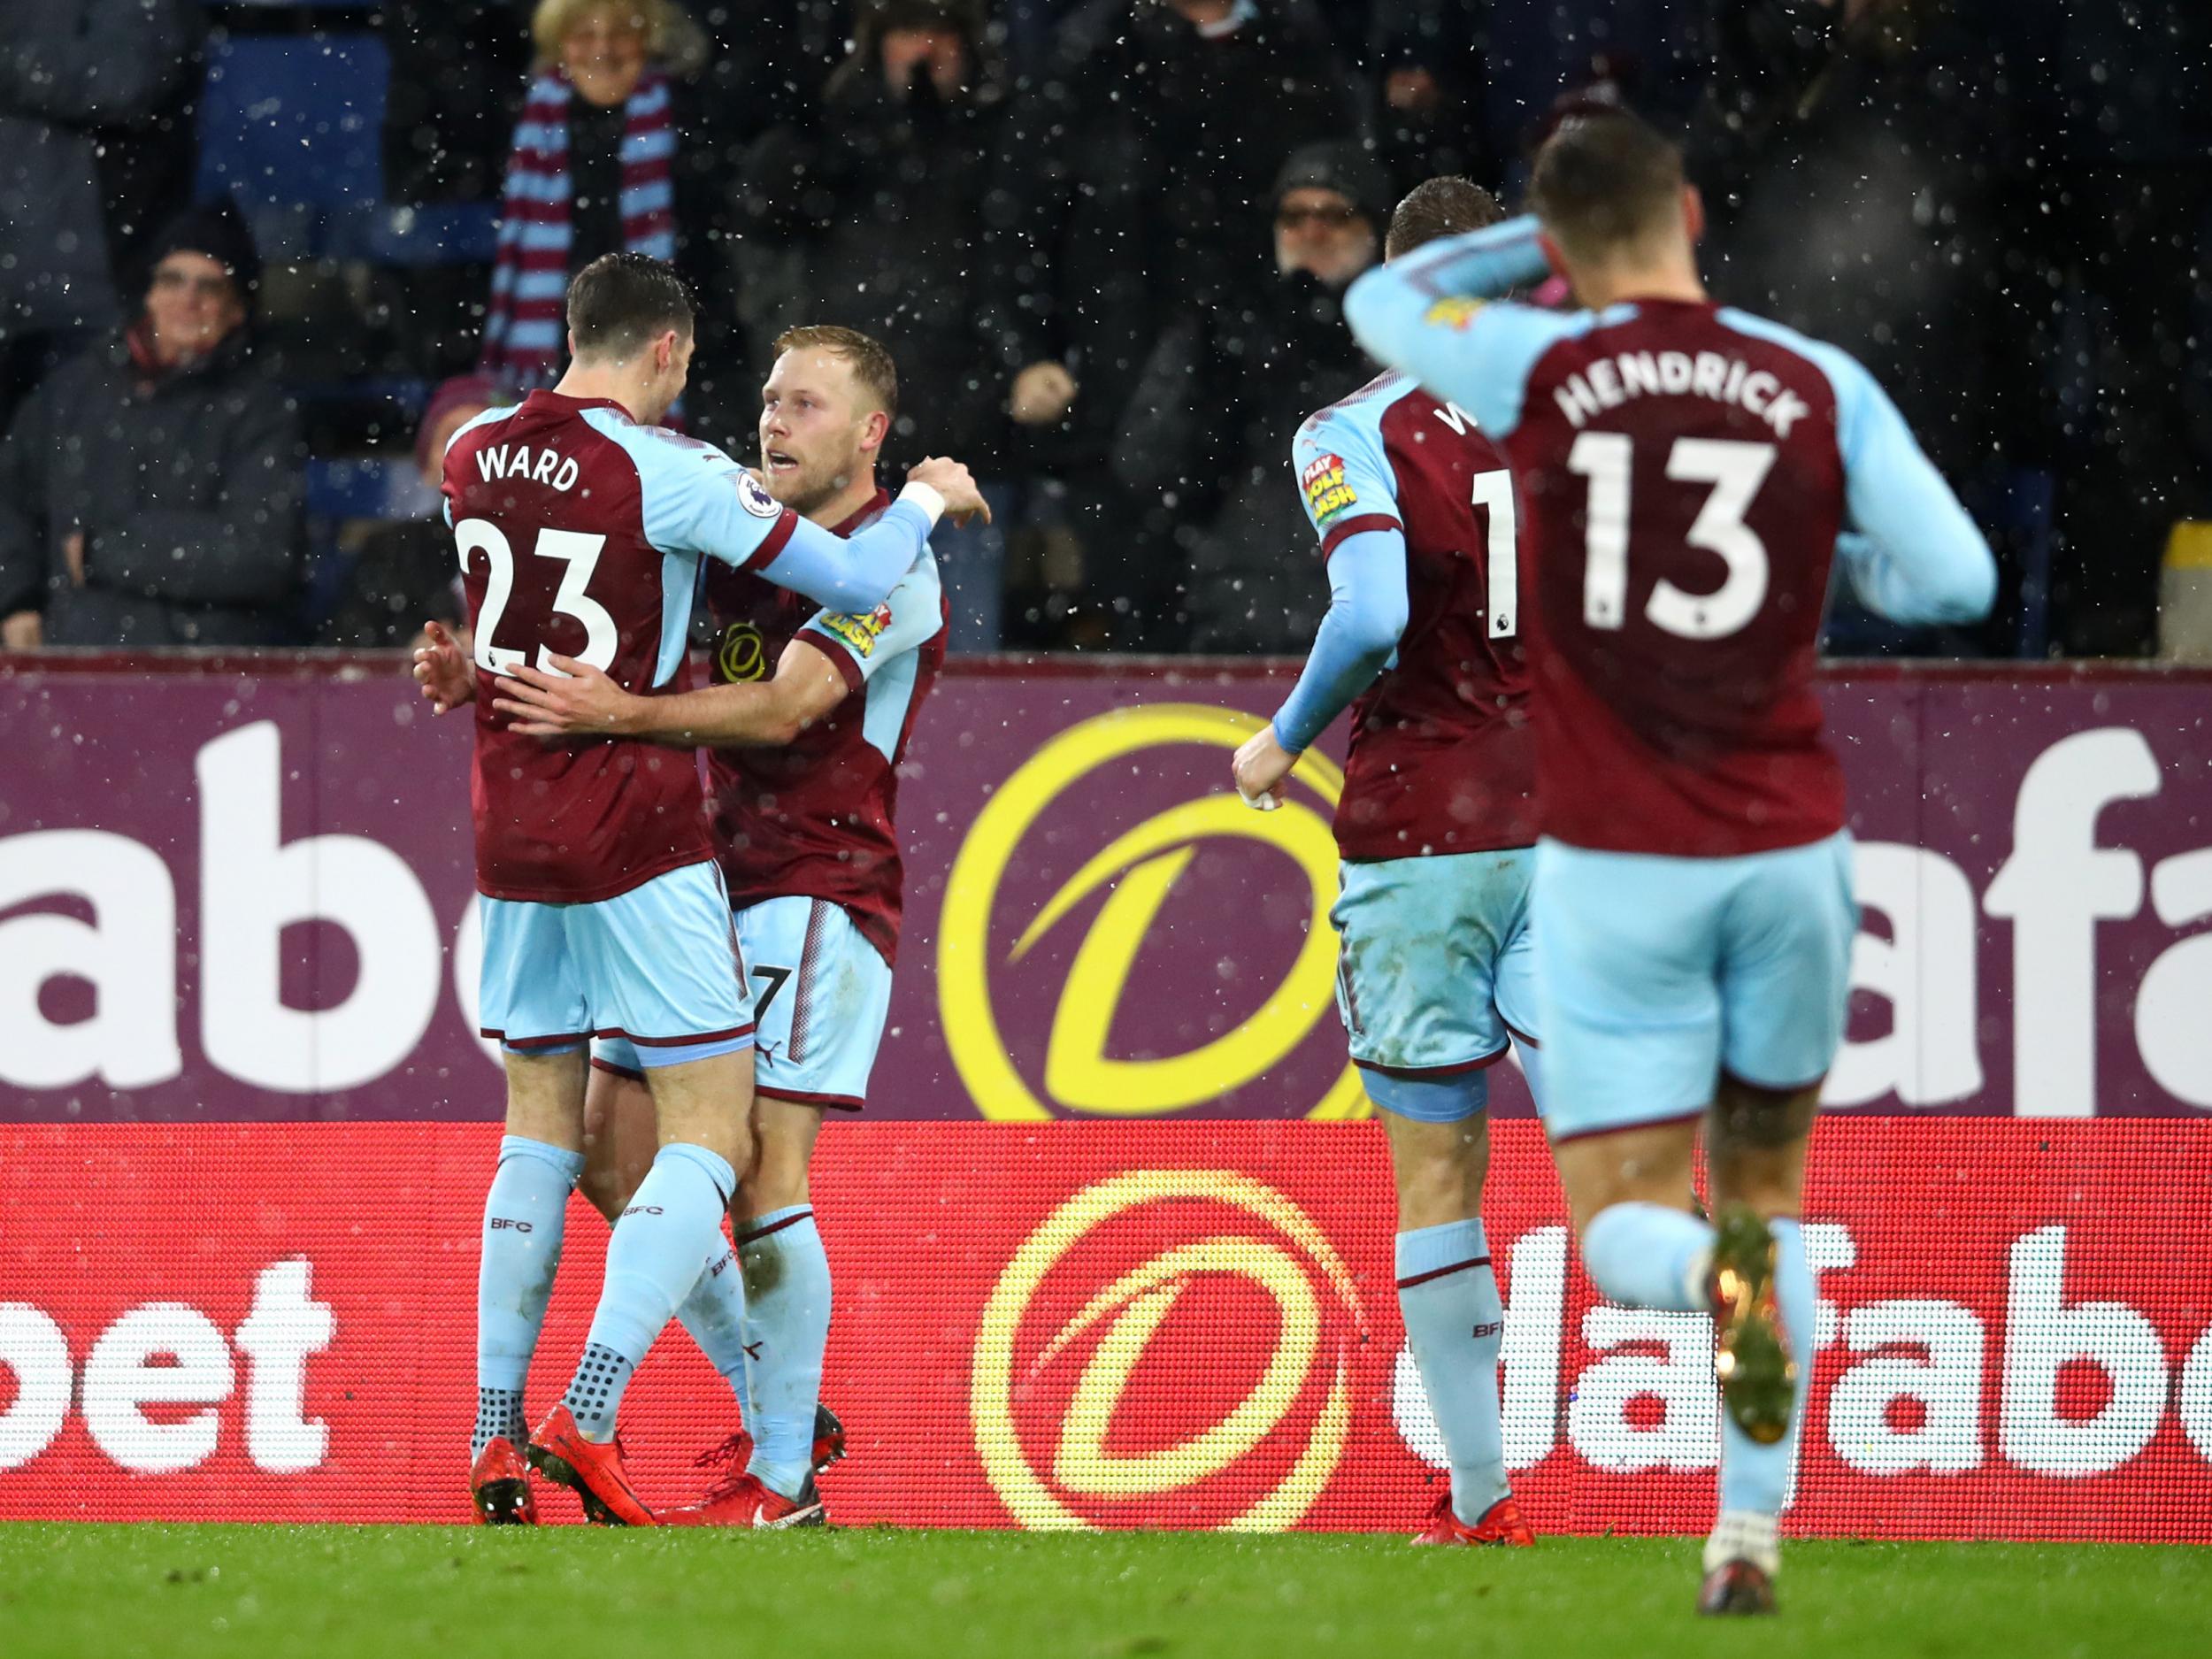 Scott Arfield scored the only goal of the game